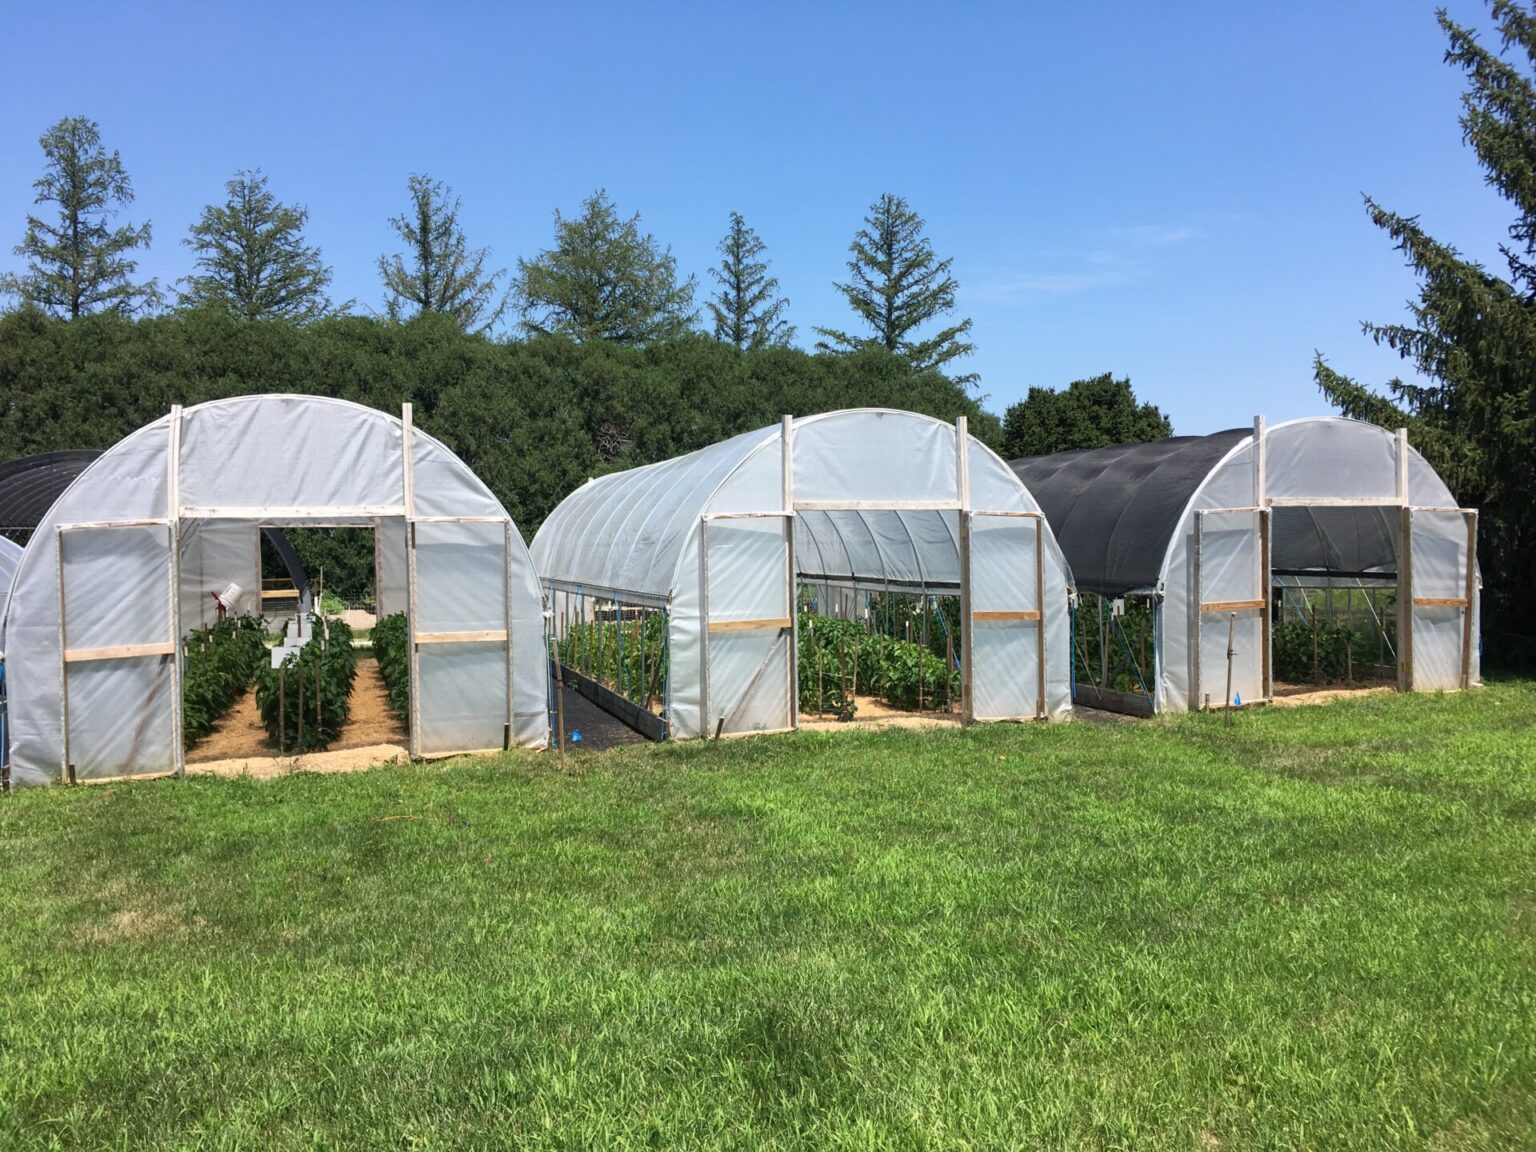 Boost Yield and Reduce Disease with Shade Cloth in Greenhouses